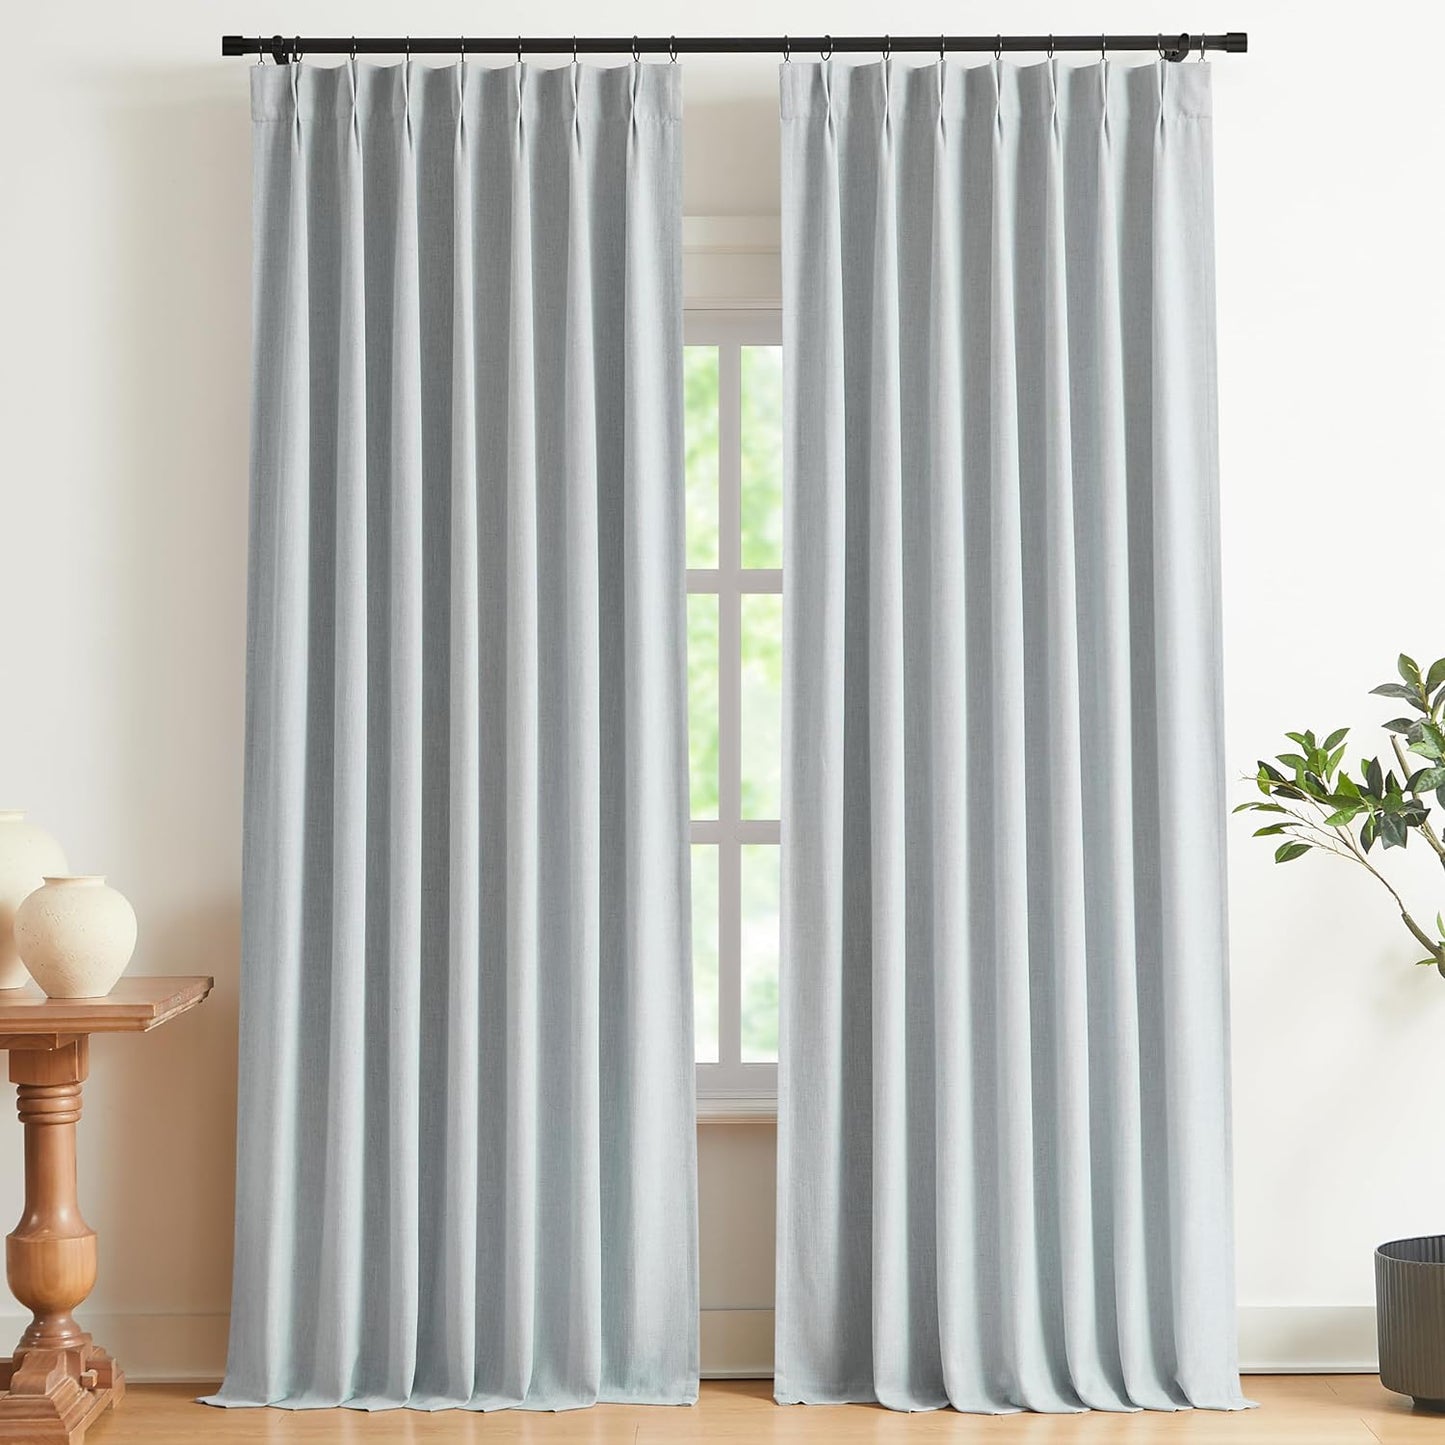 Vision Home White Pinch Pleated Full Blackout Curtains Thermal Insulated Window Curtains 84 Inch for Living Room Bedroom Room Darkening Pinch Pleat Drapes with Hooks Back Tab 2 Panel 40" Wx84 L  Vision Home Blue Fog 40"X84"X2 